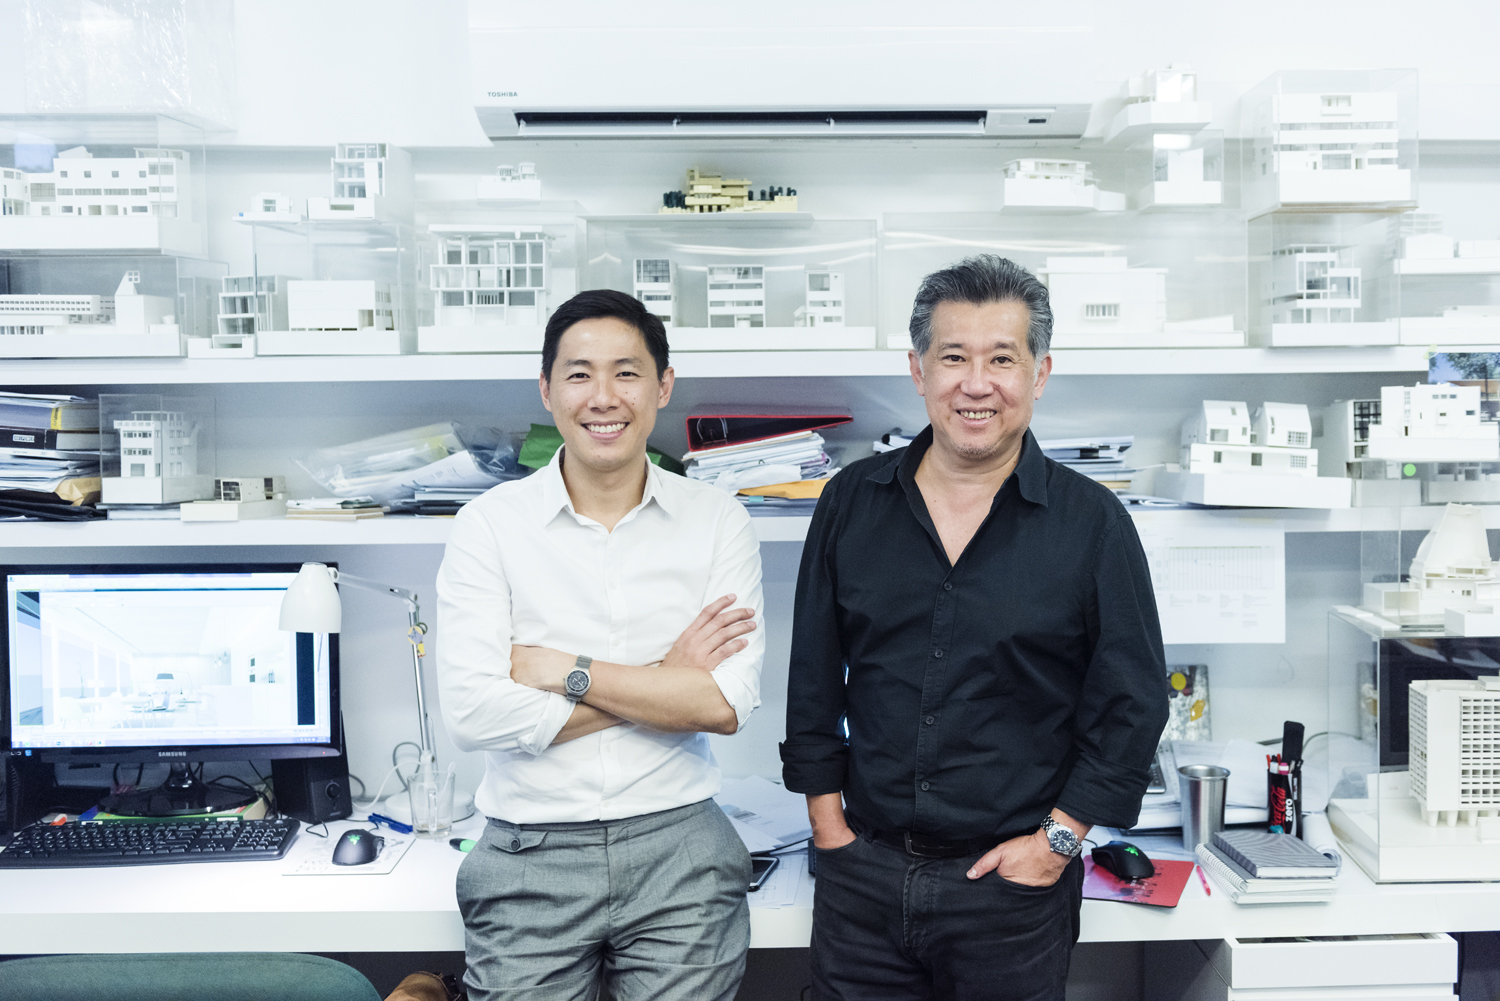 Architects Rene Tan and Jonathan Quek at their office